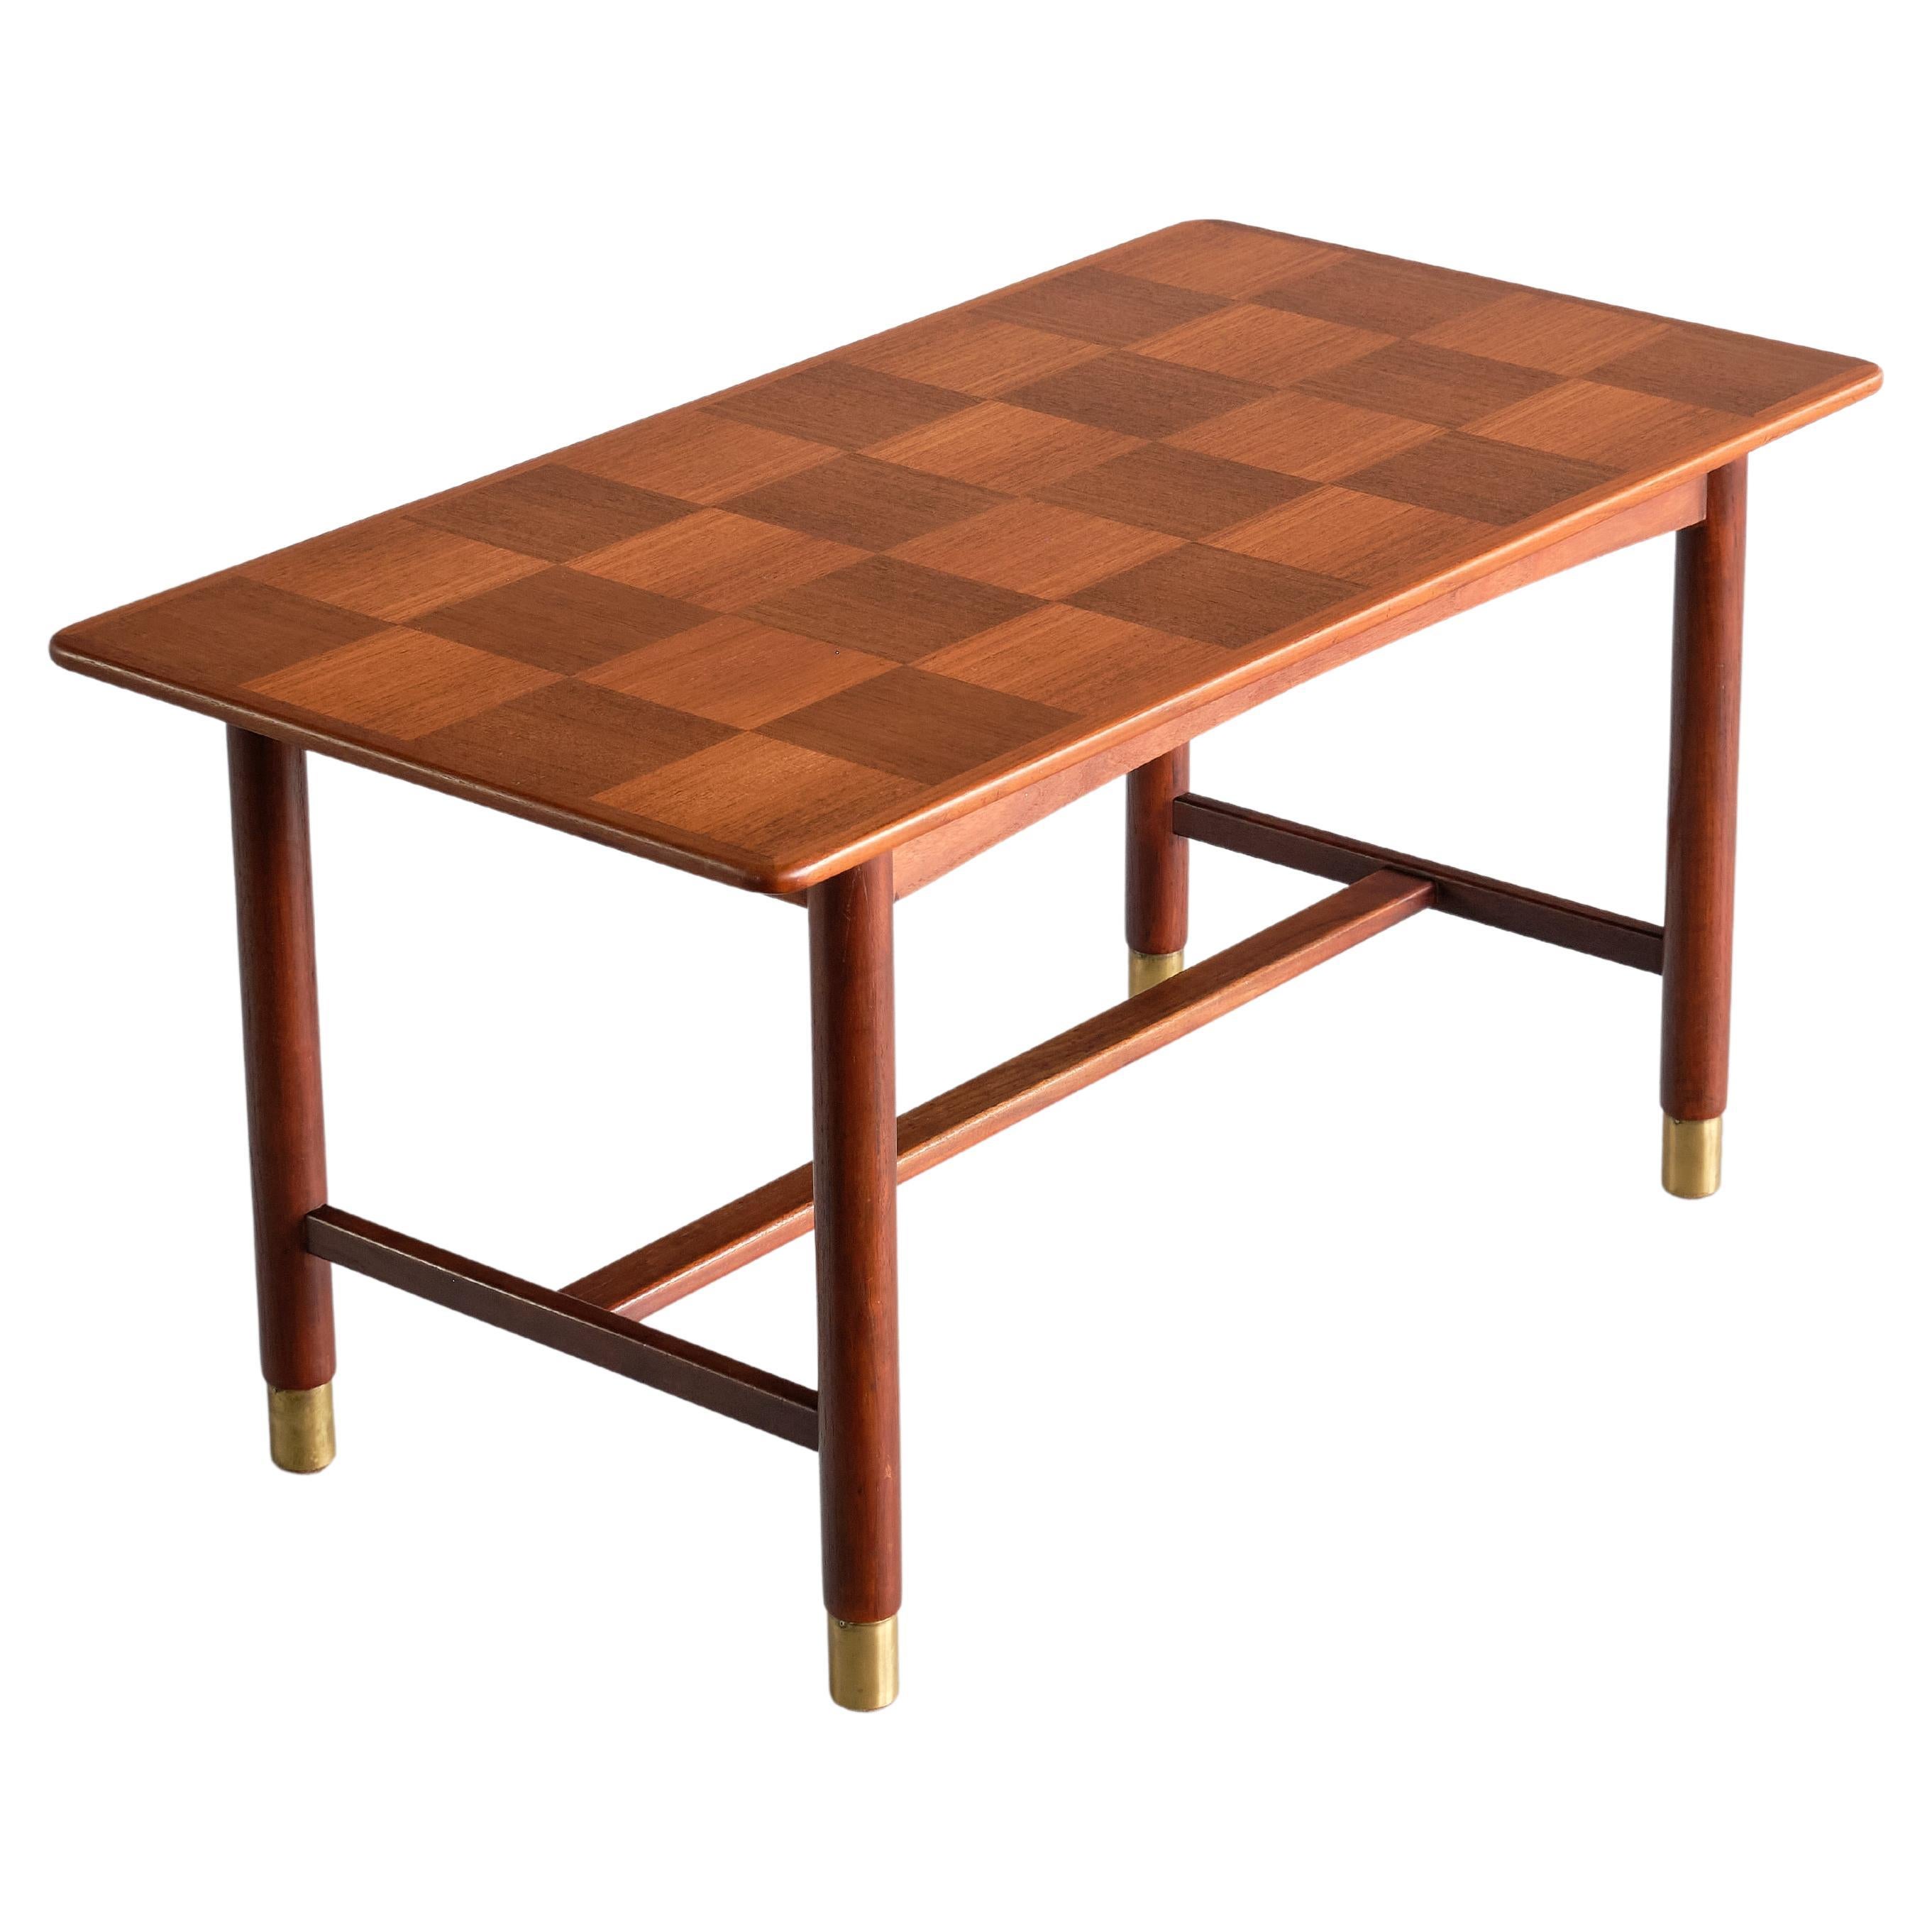 Carl Axel Acking Coffee Table in Teak and Brass, SMF Bodafors, Sweden, 1950s